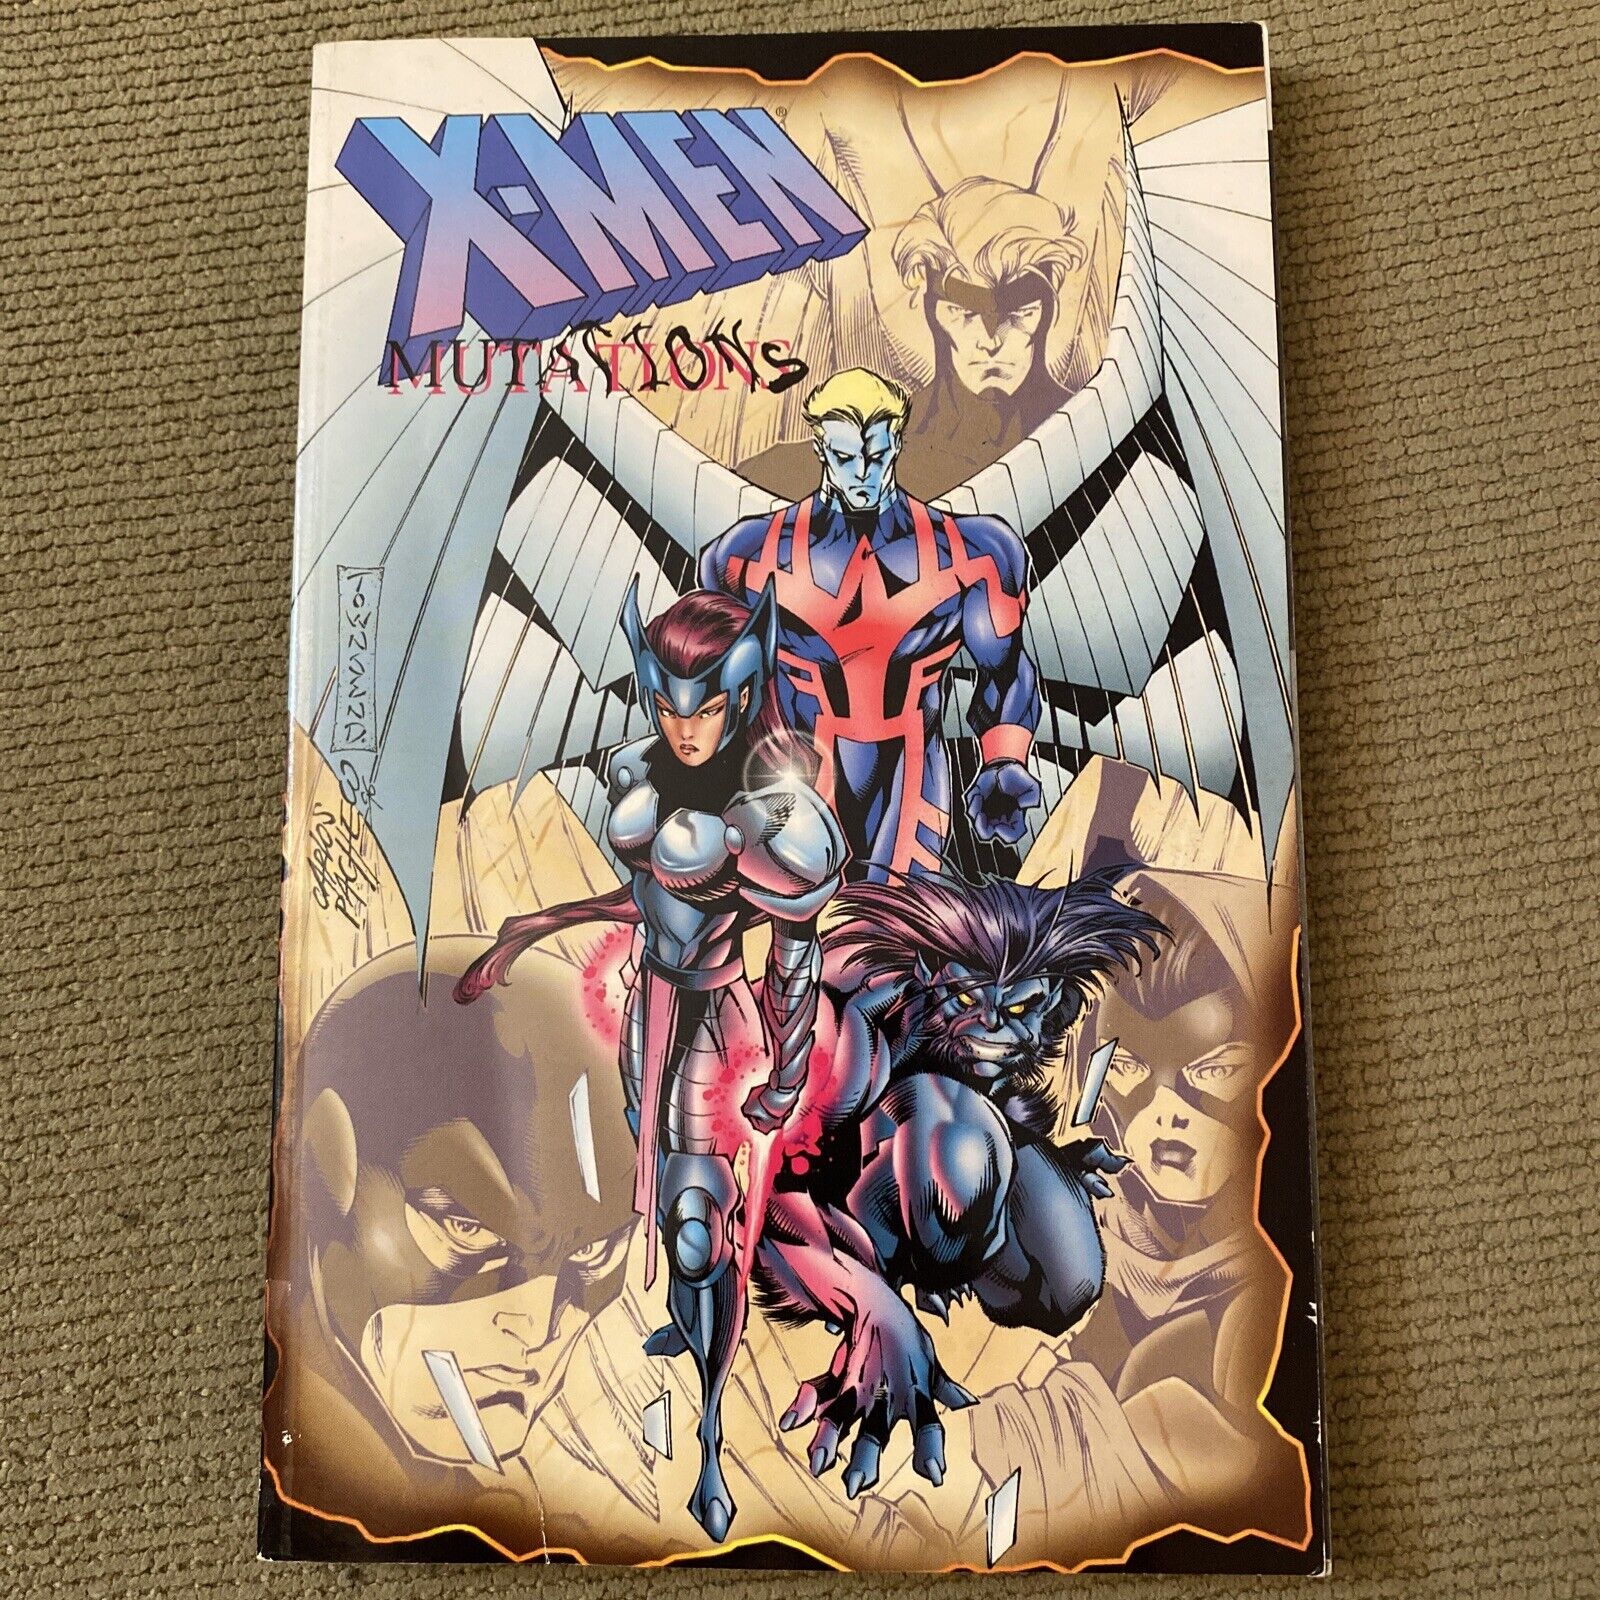 X-Men Mutations,  Marvel Comics,  cover by Carlos Pacheco  TPB Re-Print edition